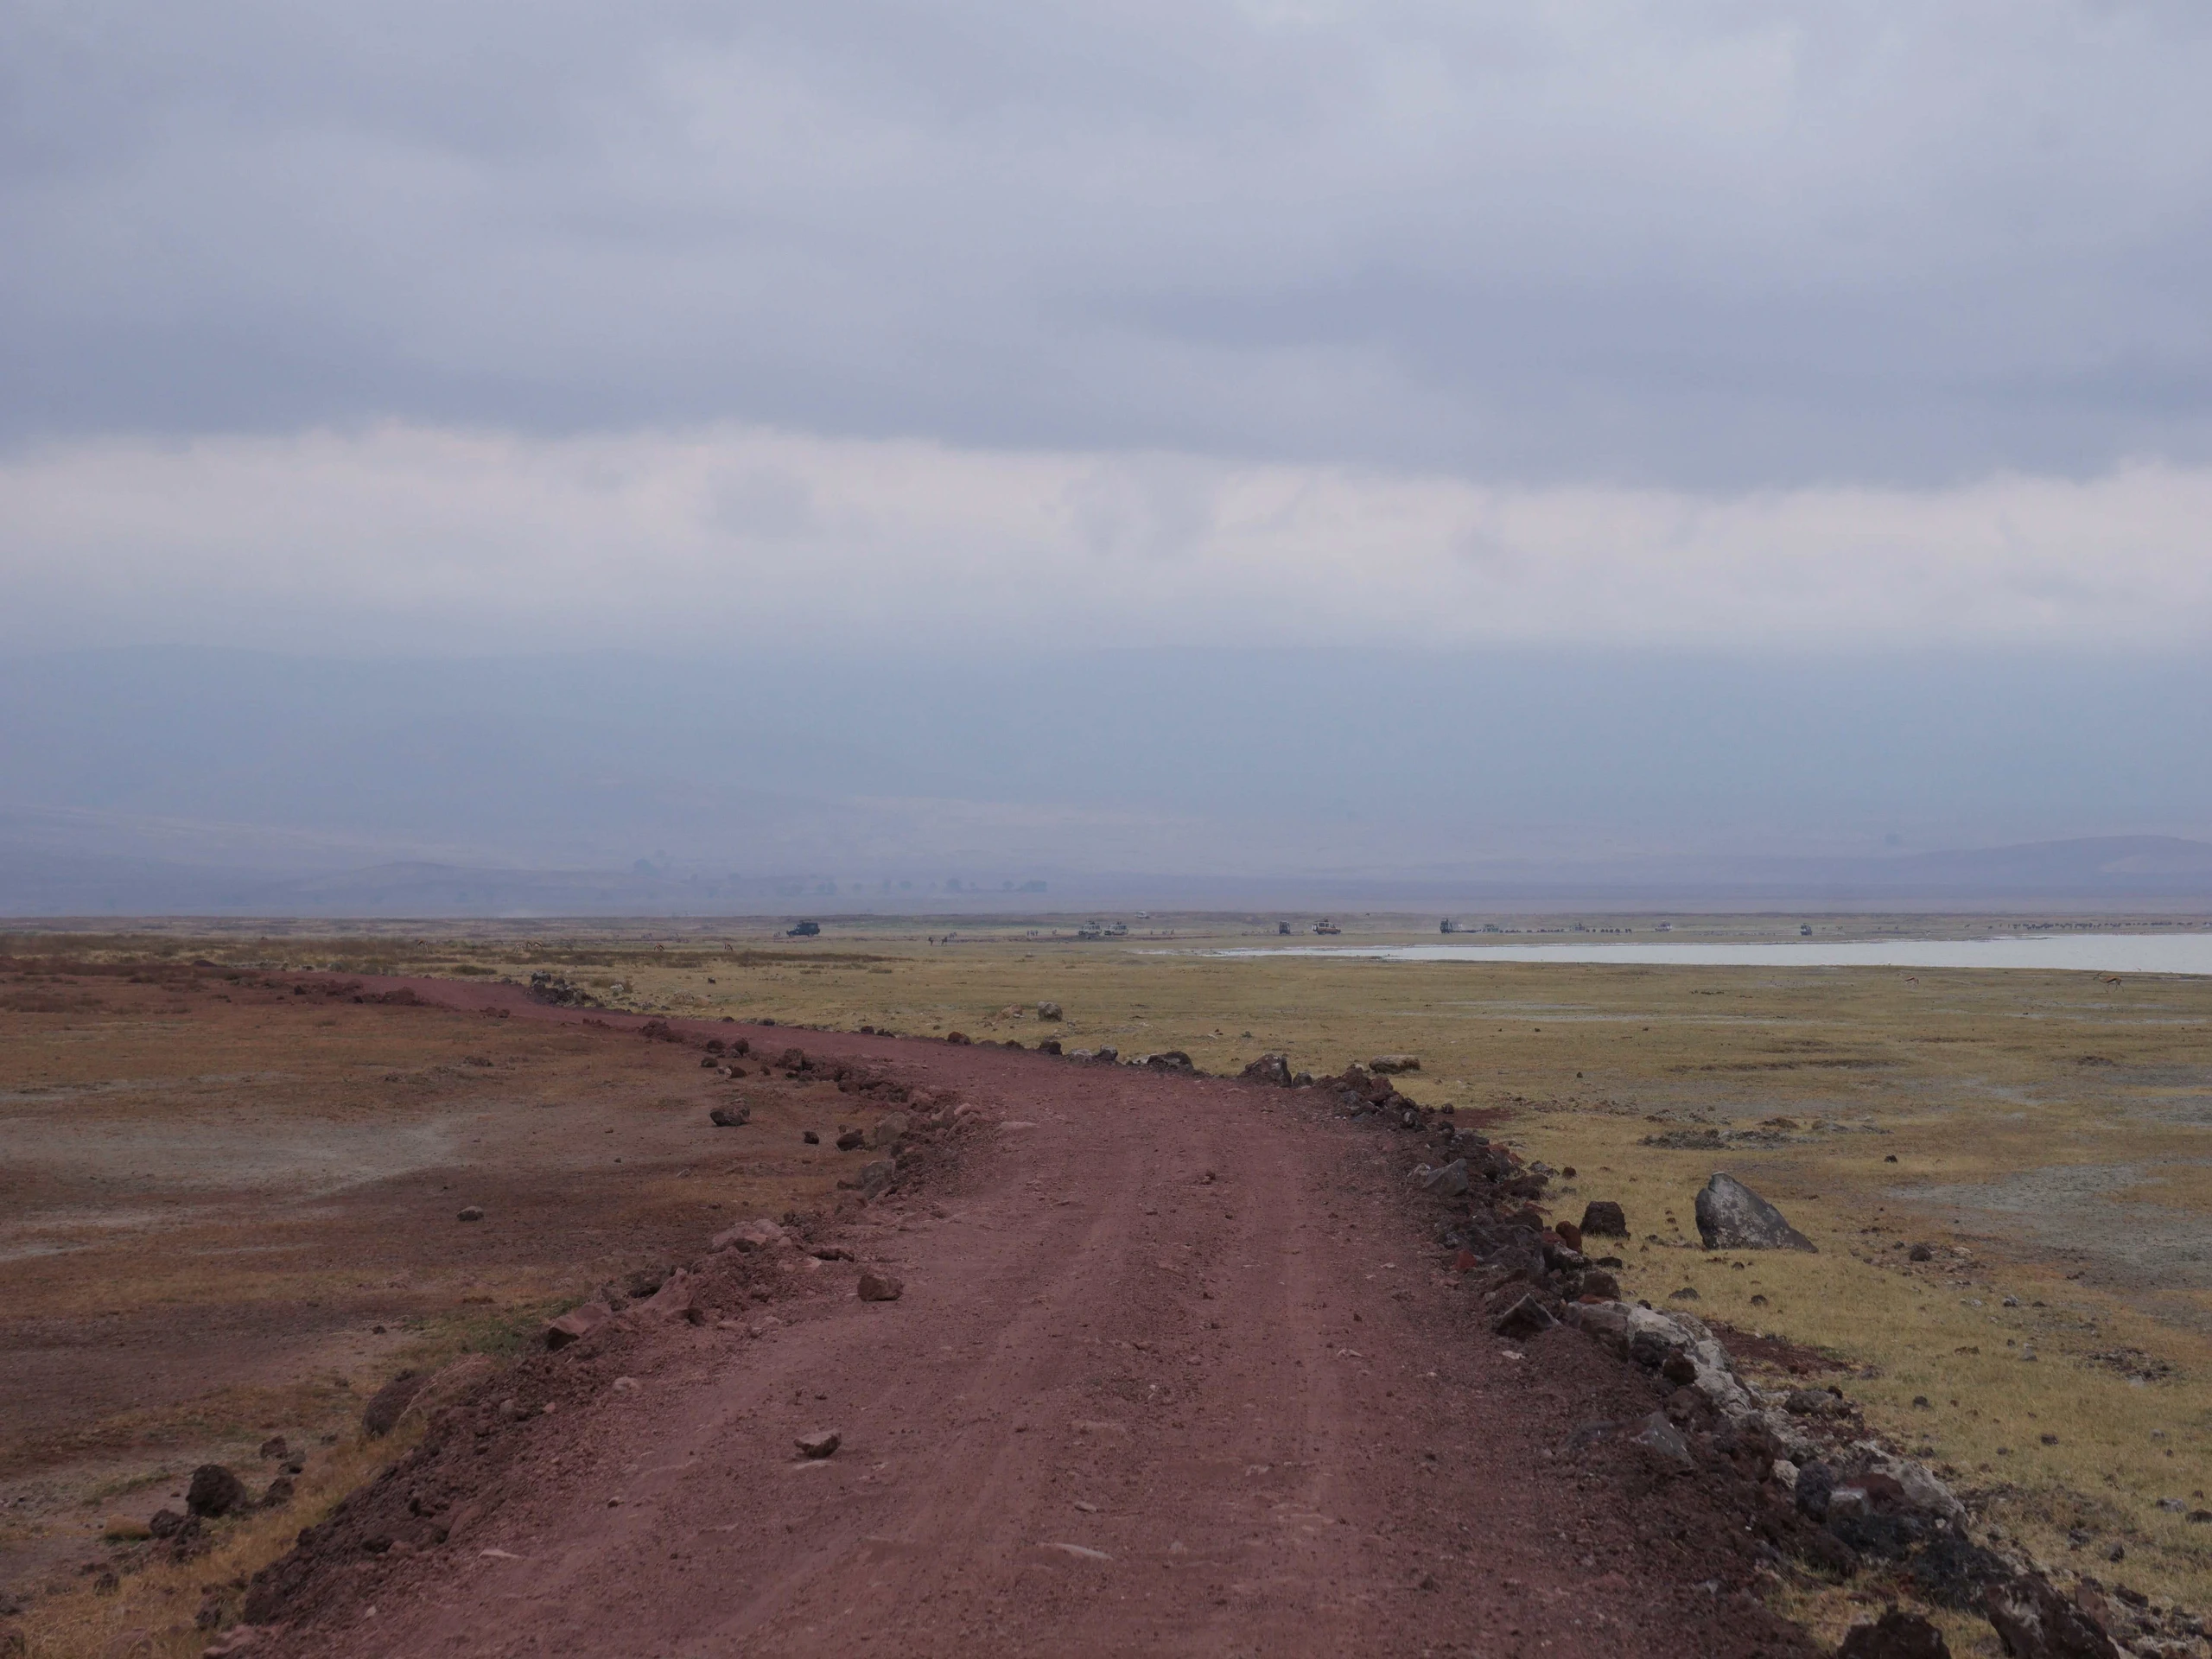 The landscape in Ngorongoro Crater